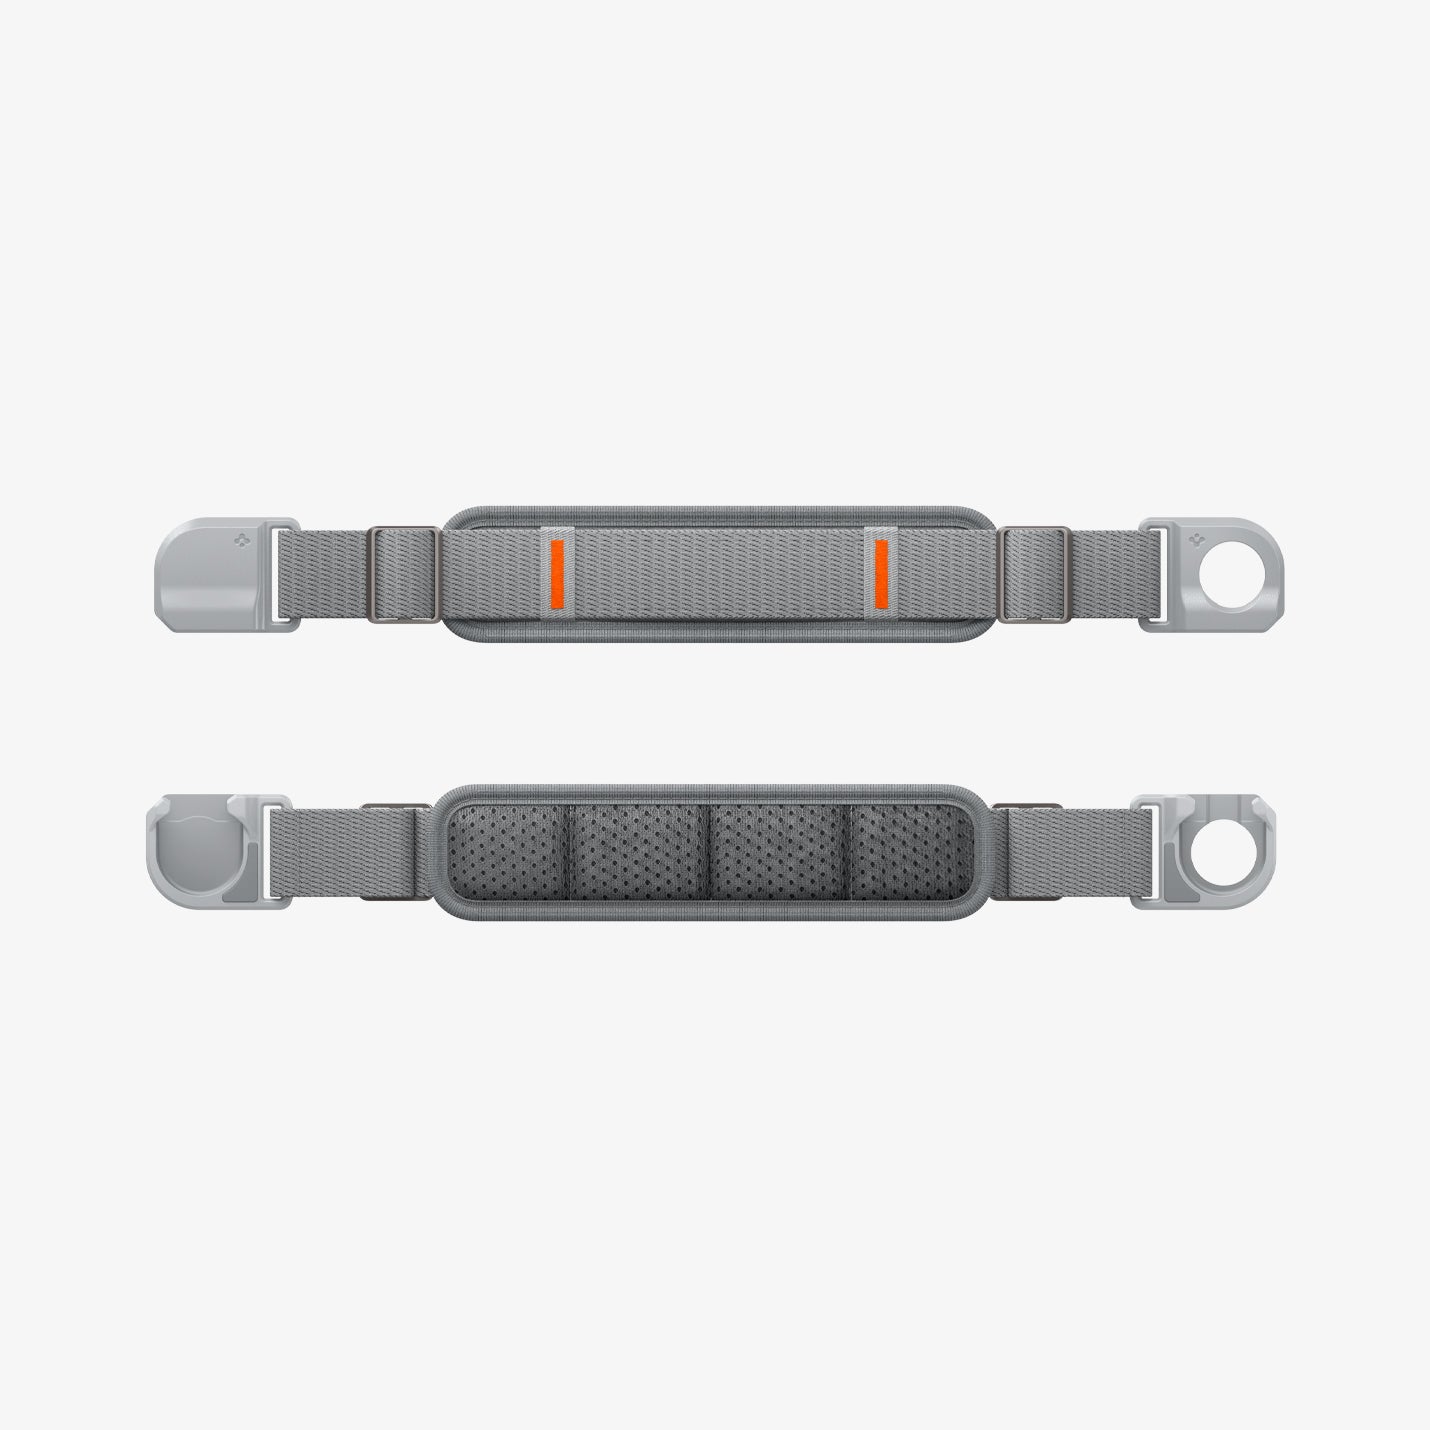 AFA07255 - Apple Vision Pro Head Strap in Charcoal Gray showing the top and bottom of the head strap